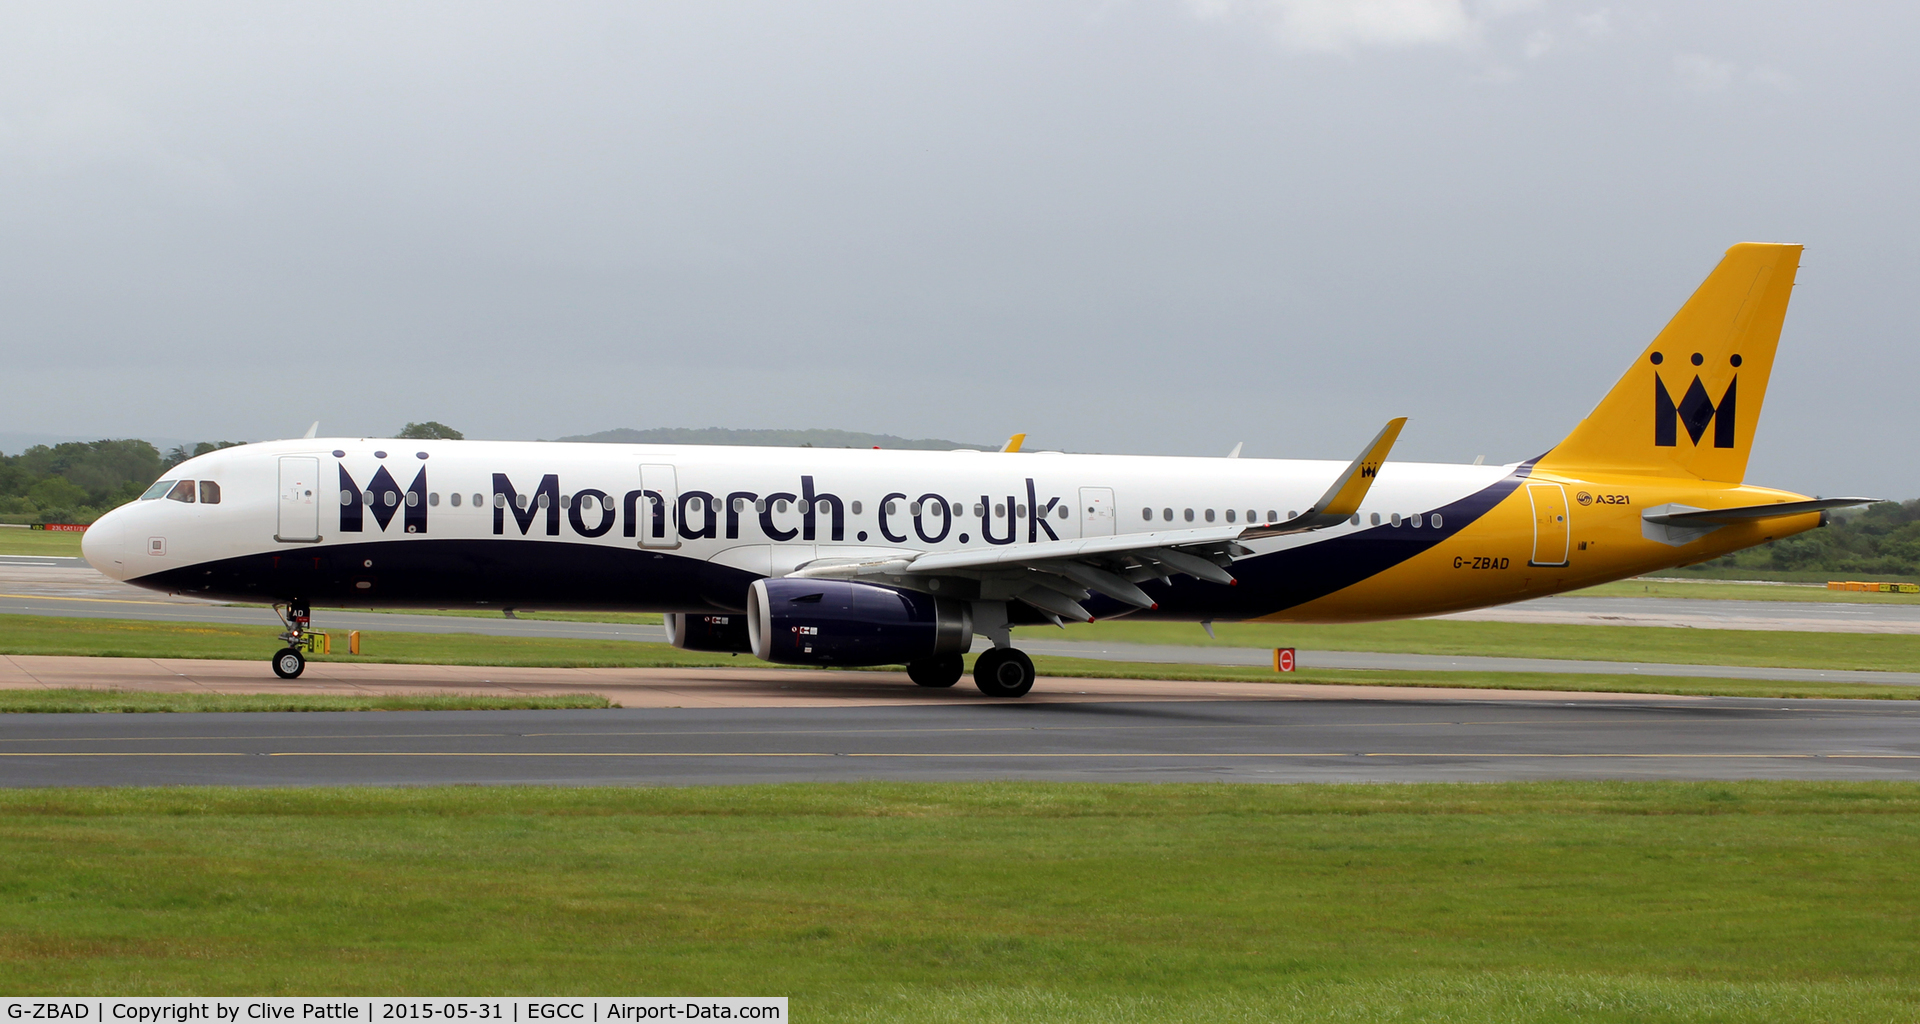 G-ZBAD, 2013 Airbus A321-231 C/N 5582, Monarch action at Manchester EGCC